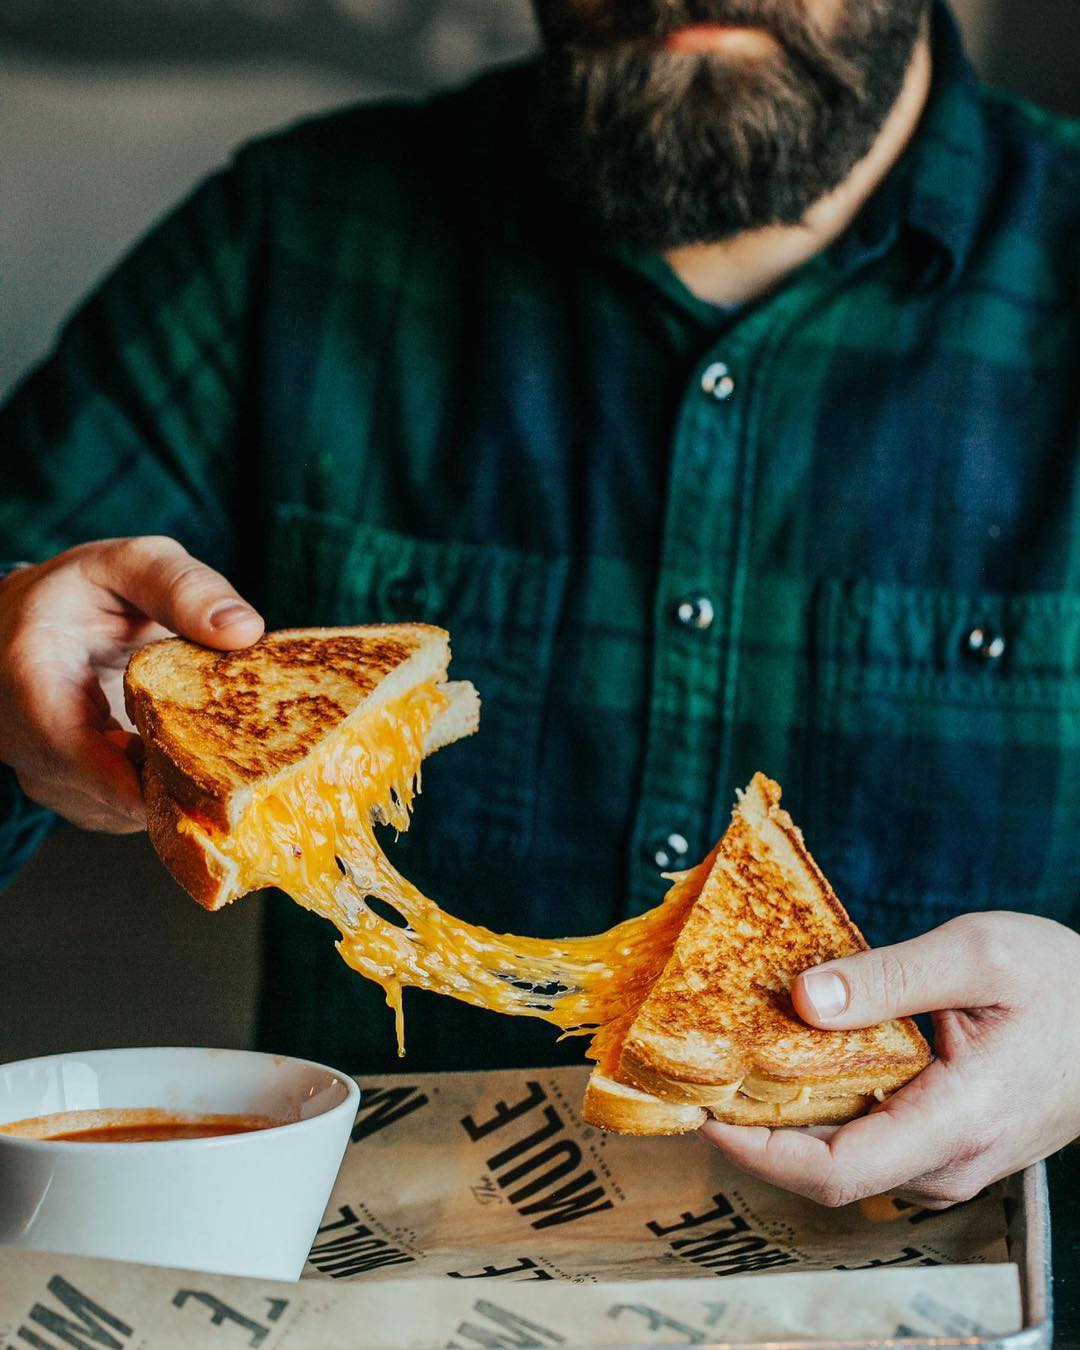 Guy pulling apart cheesy grilled cheese. Photo by Instagram user @dwellingtable